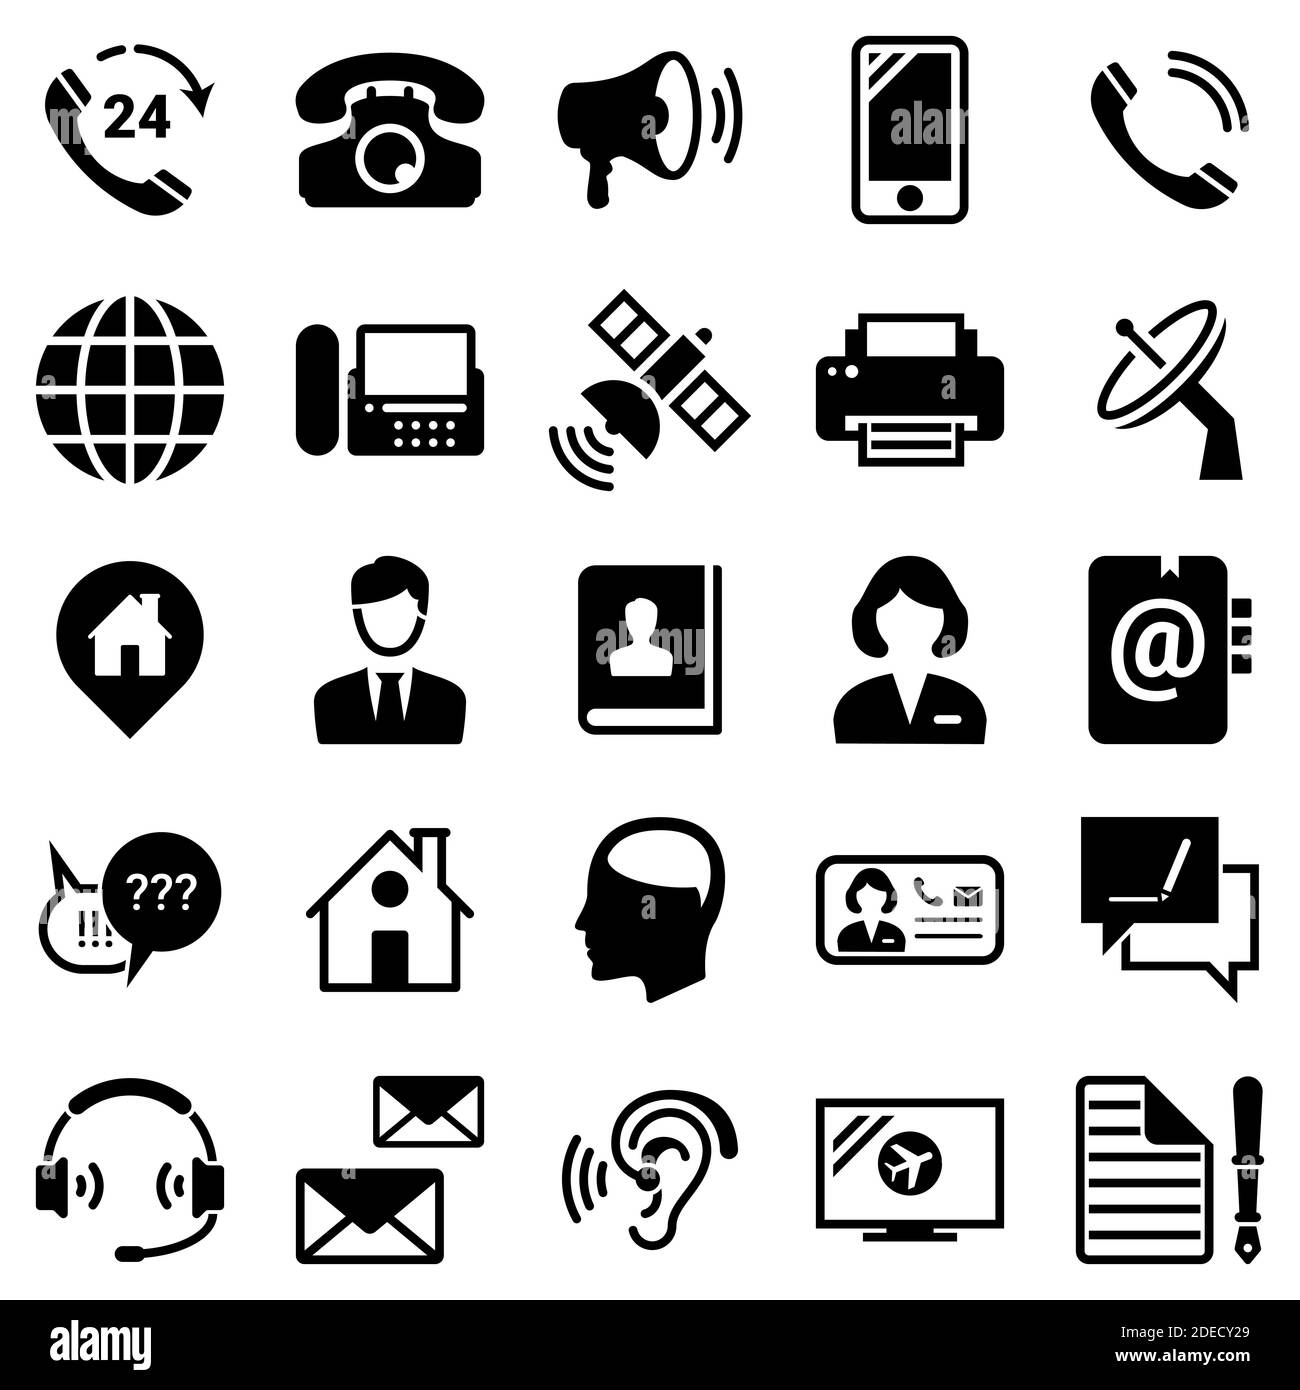 Set of simple icons on a theme Contact, connection, communication devices, vector, design, collection, flat, sign, symbol,element, object, illustratio Stock Vector